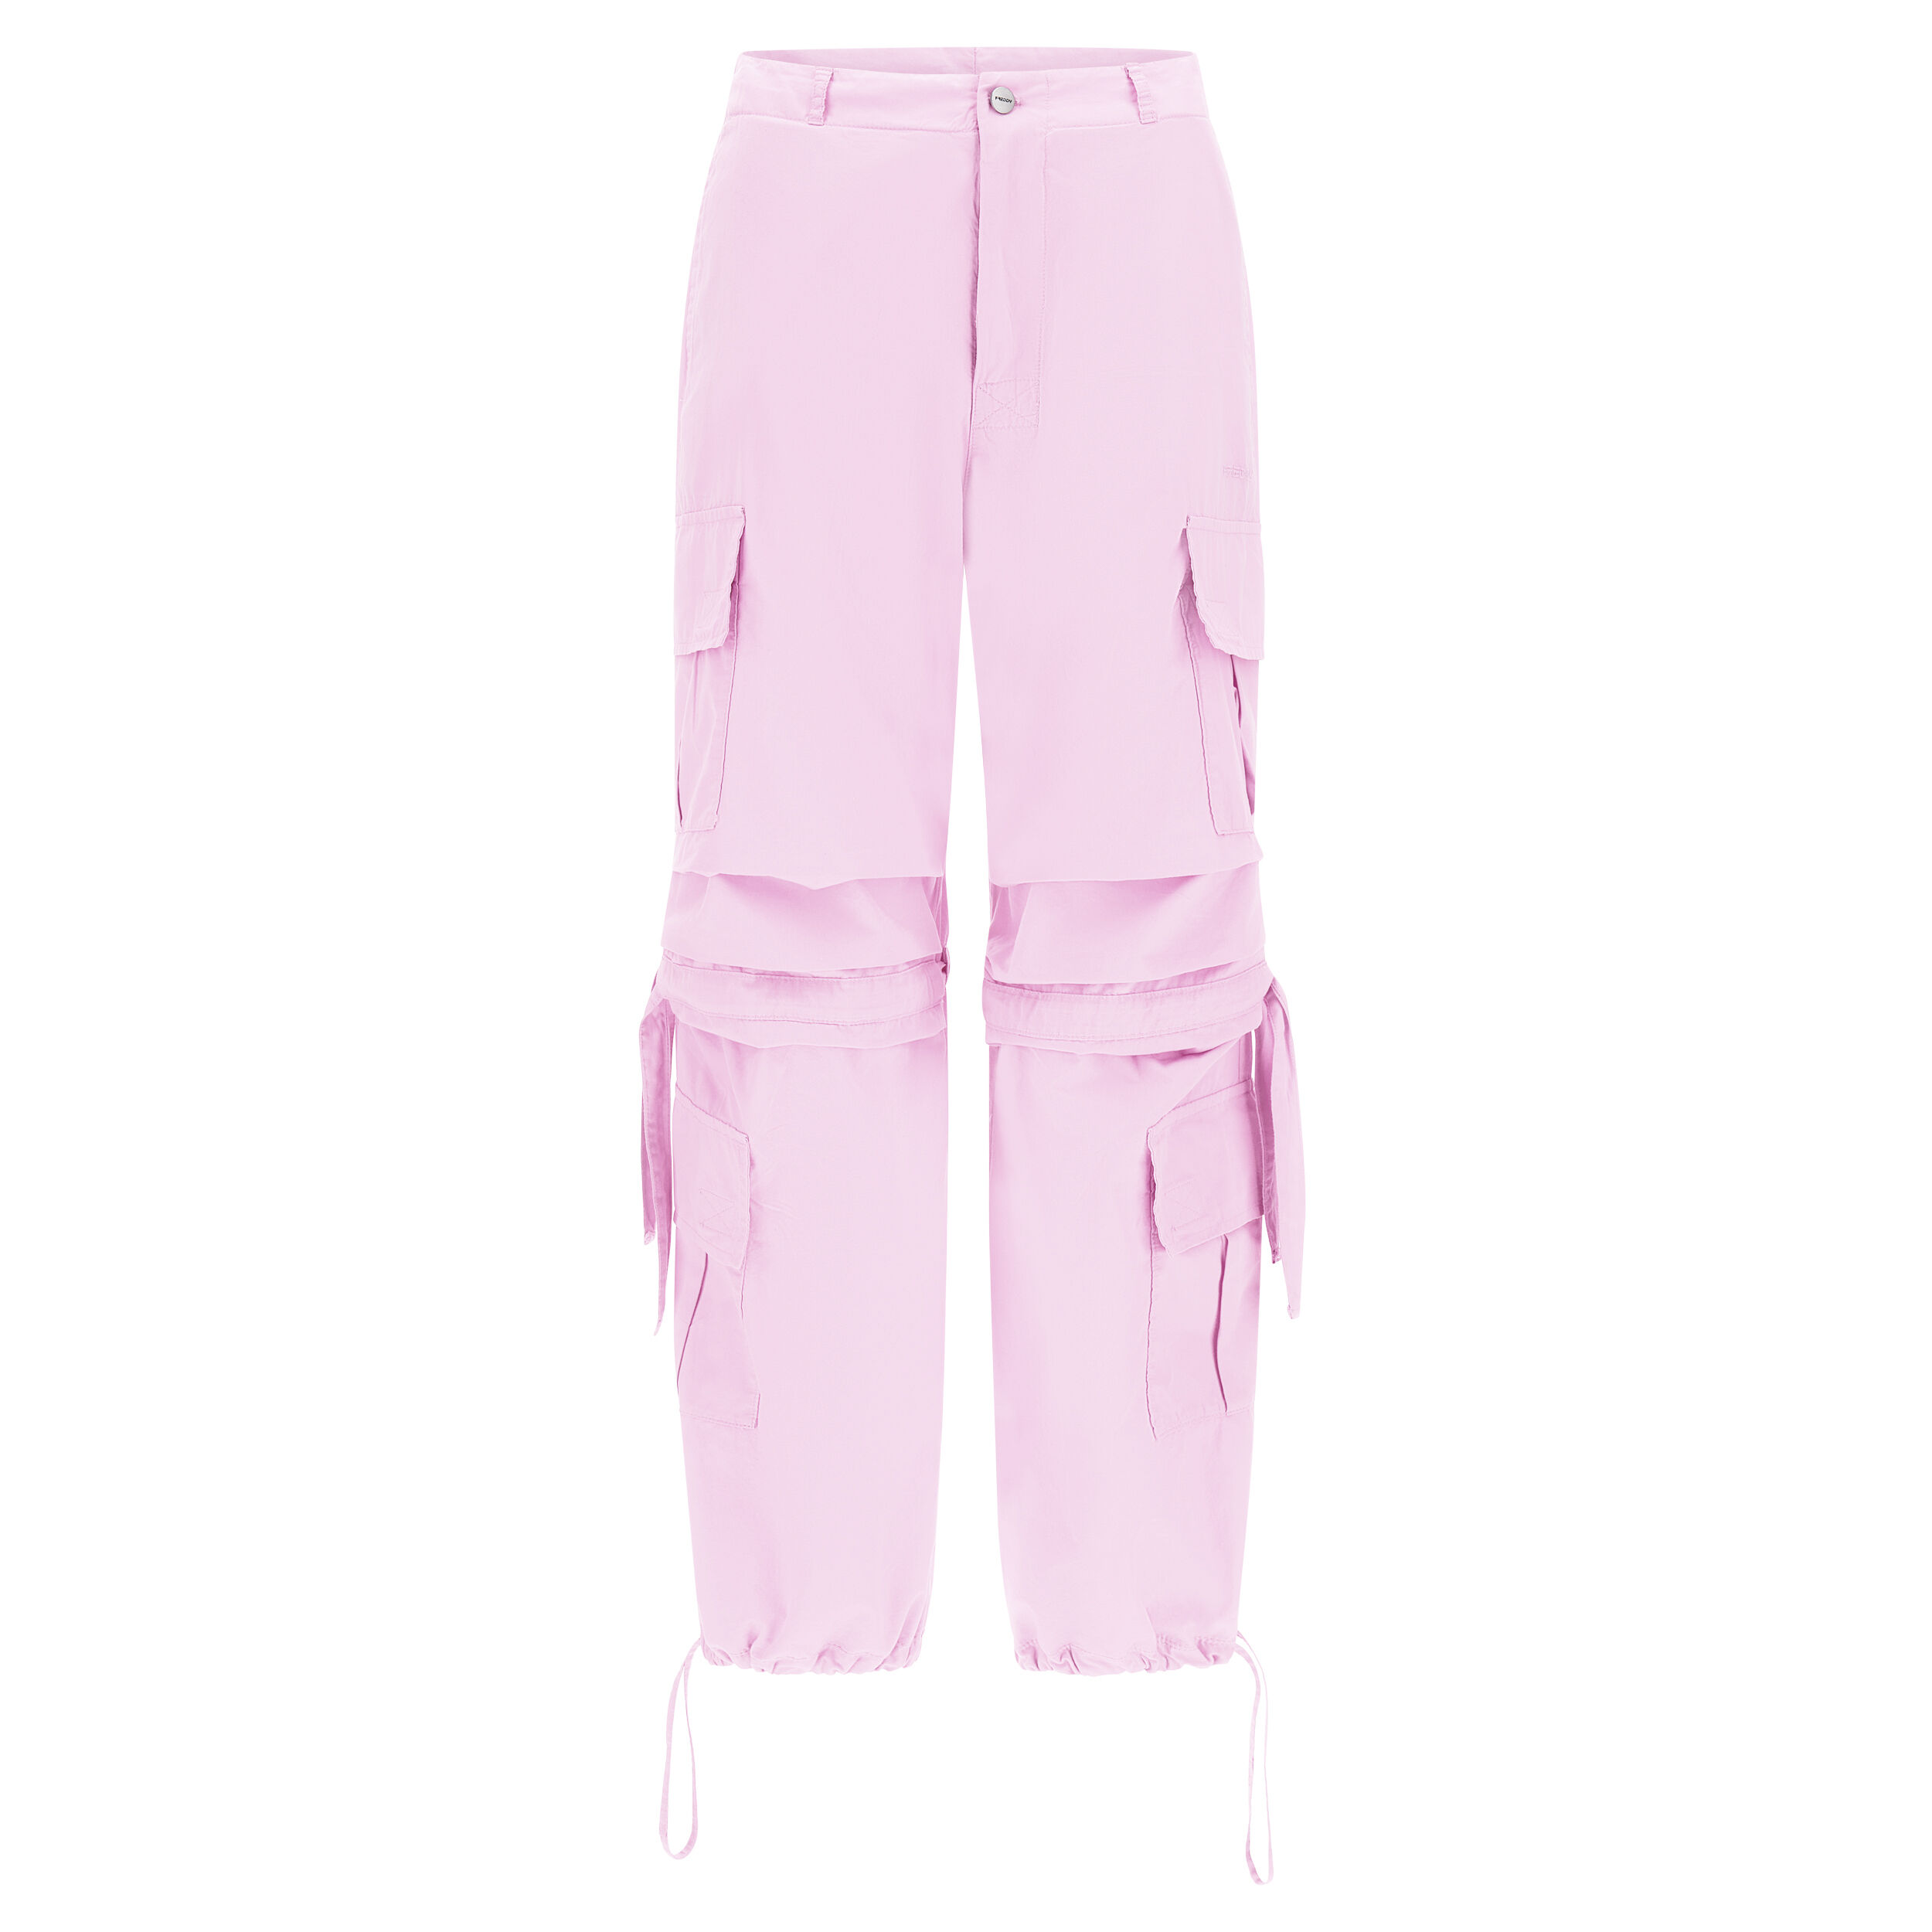 Freddy Pantaloni cargo con doppie tasche e coulisse intermedia Pink Lavender Direct Dyed Donna Extra Large